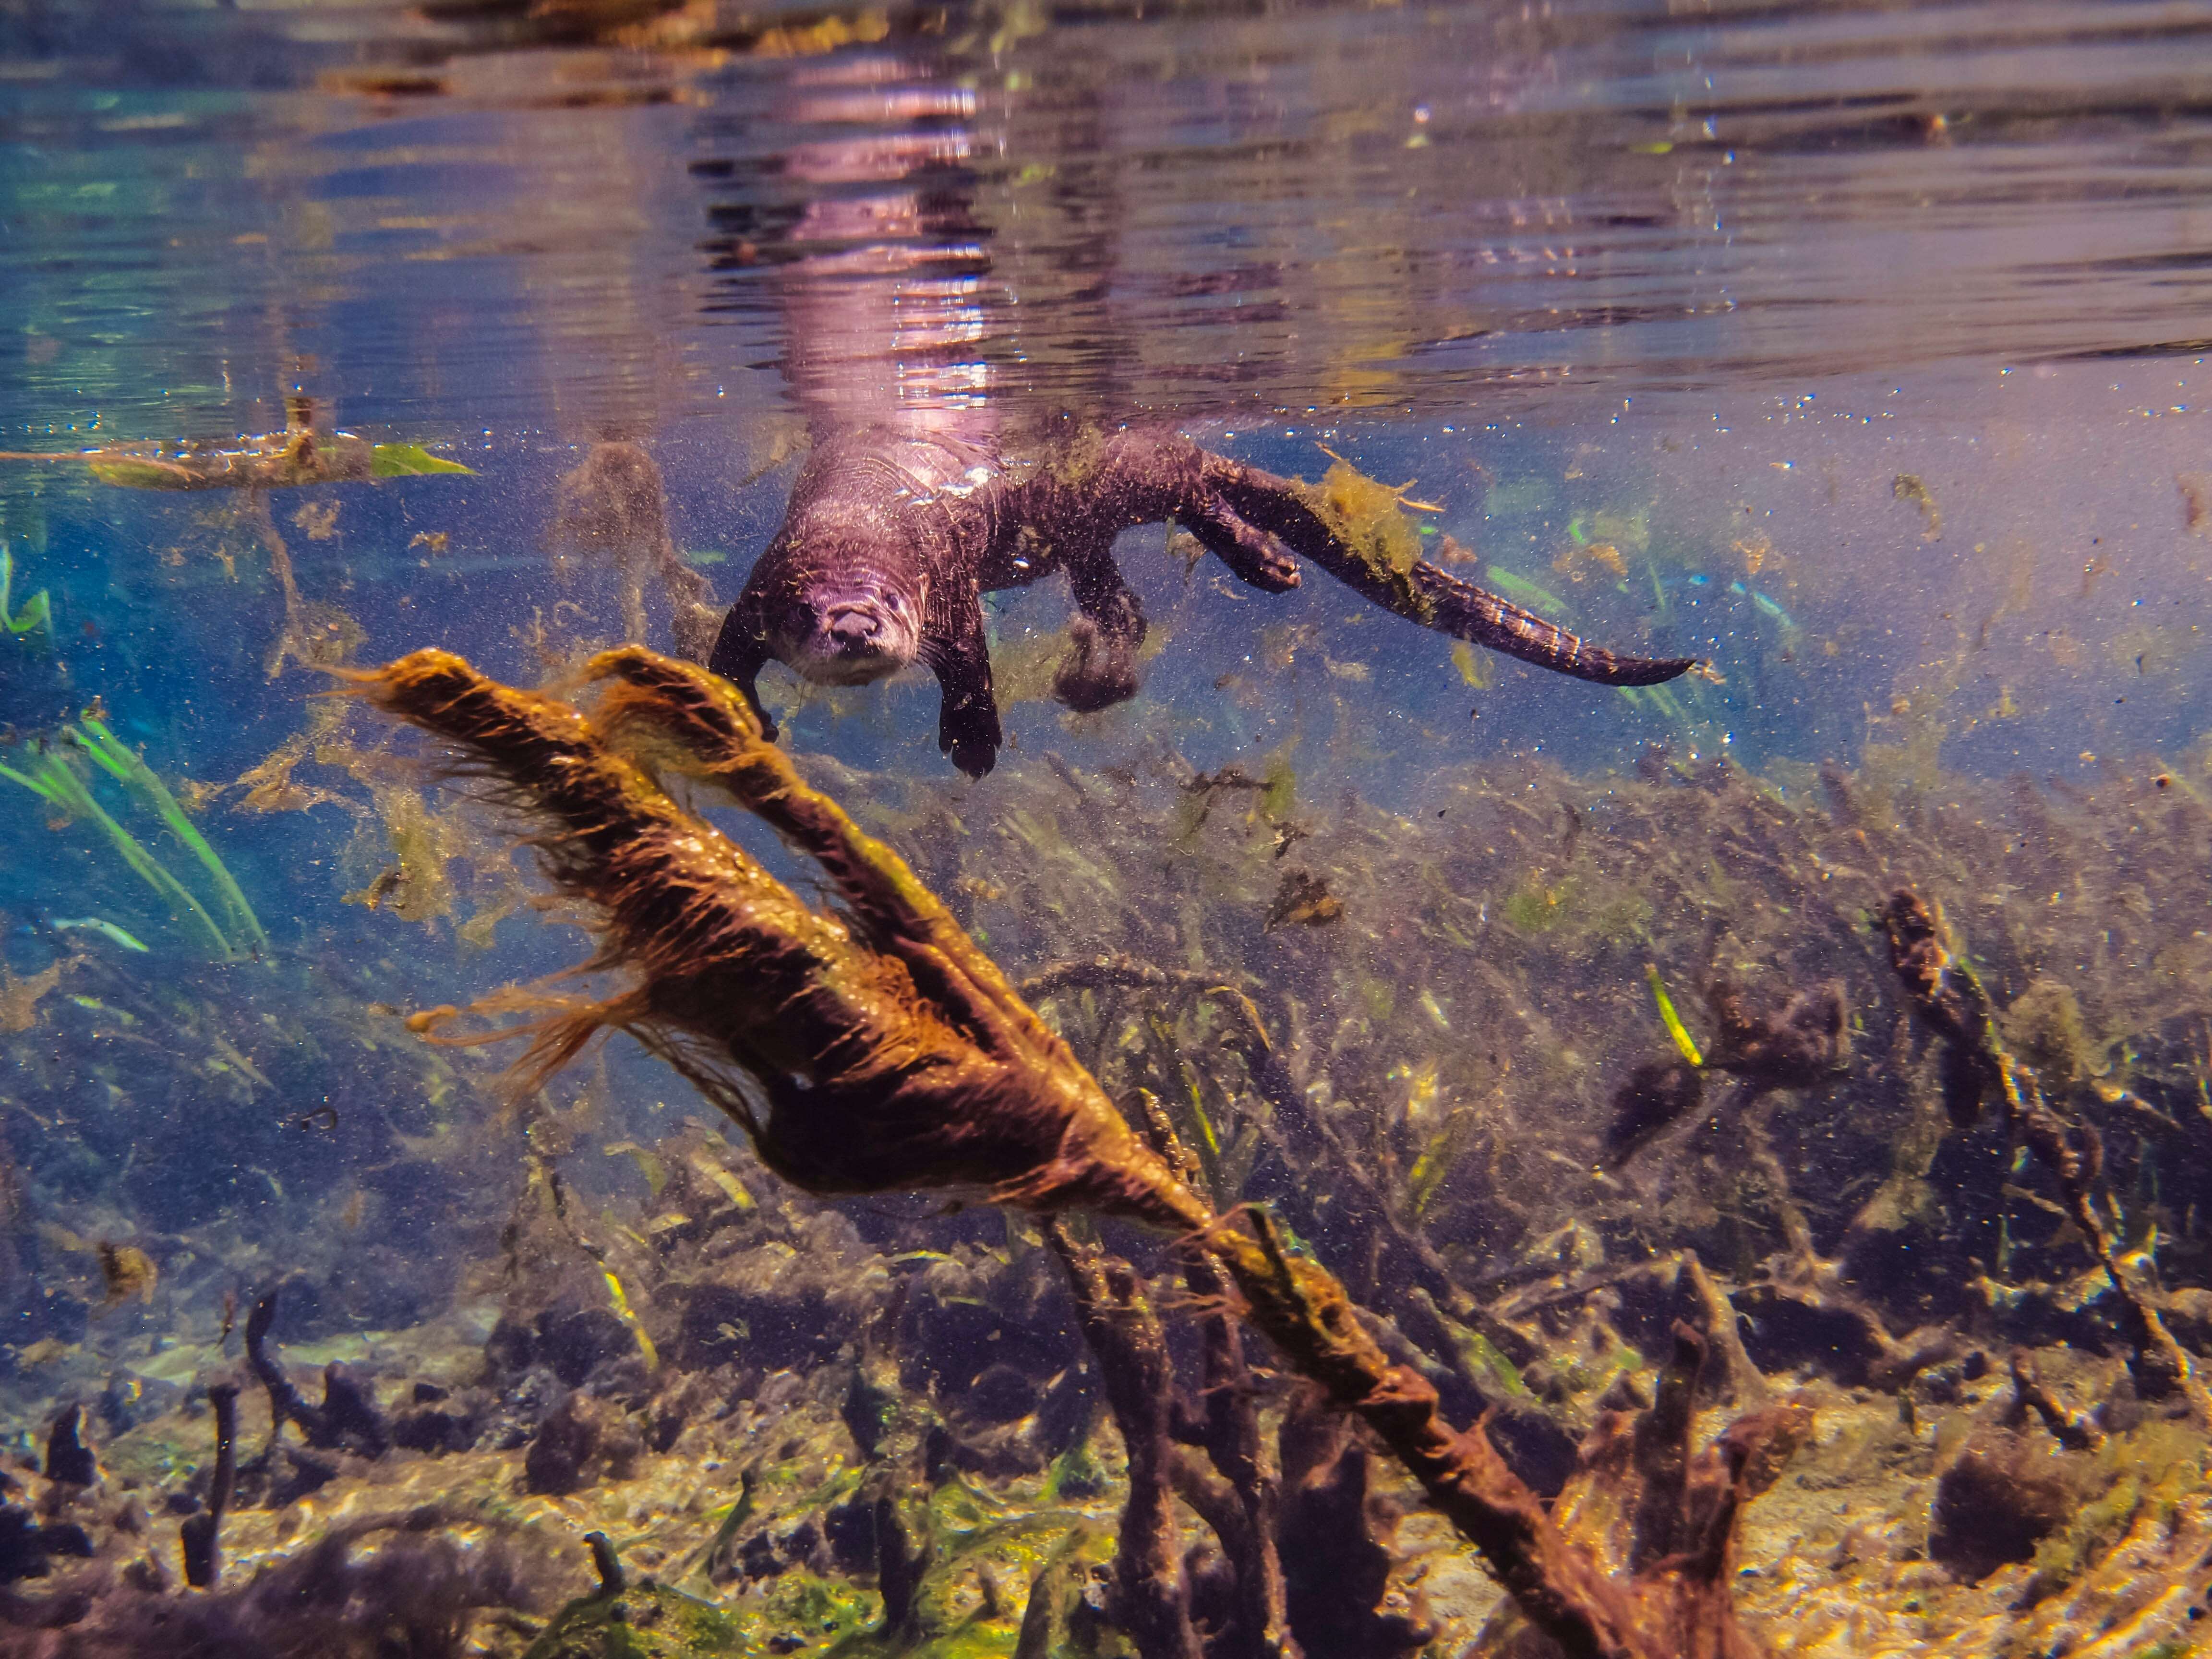 Image of Otter sp.